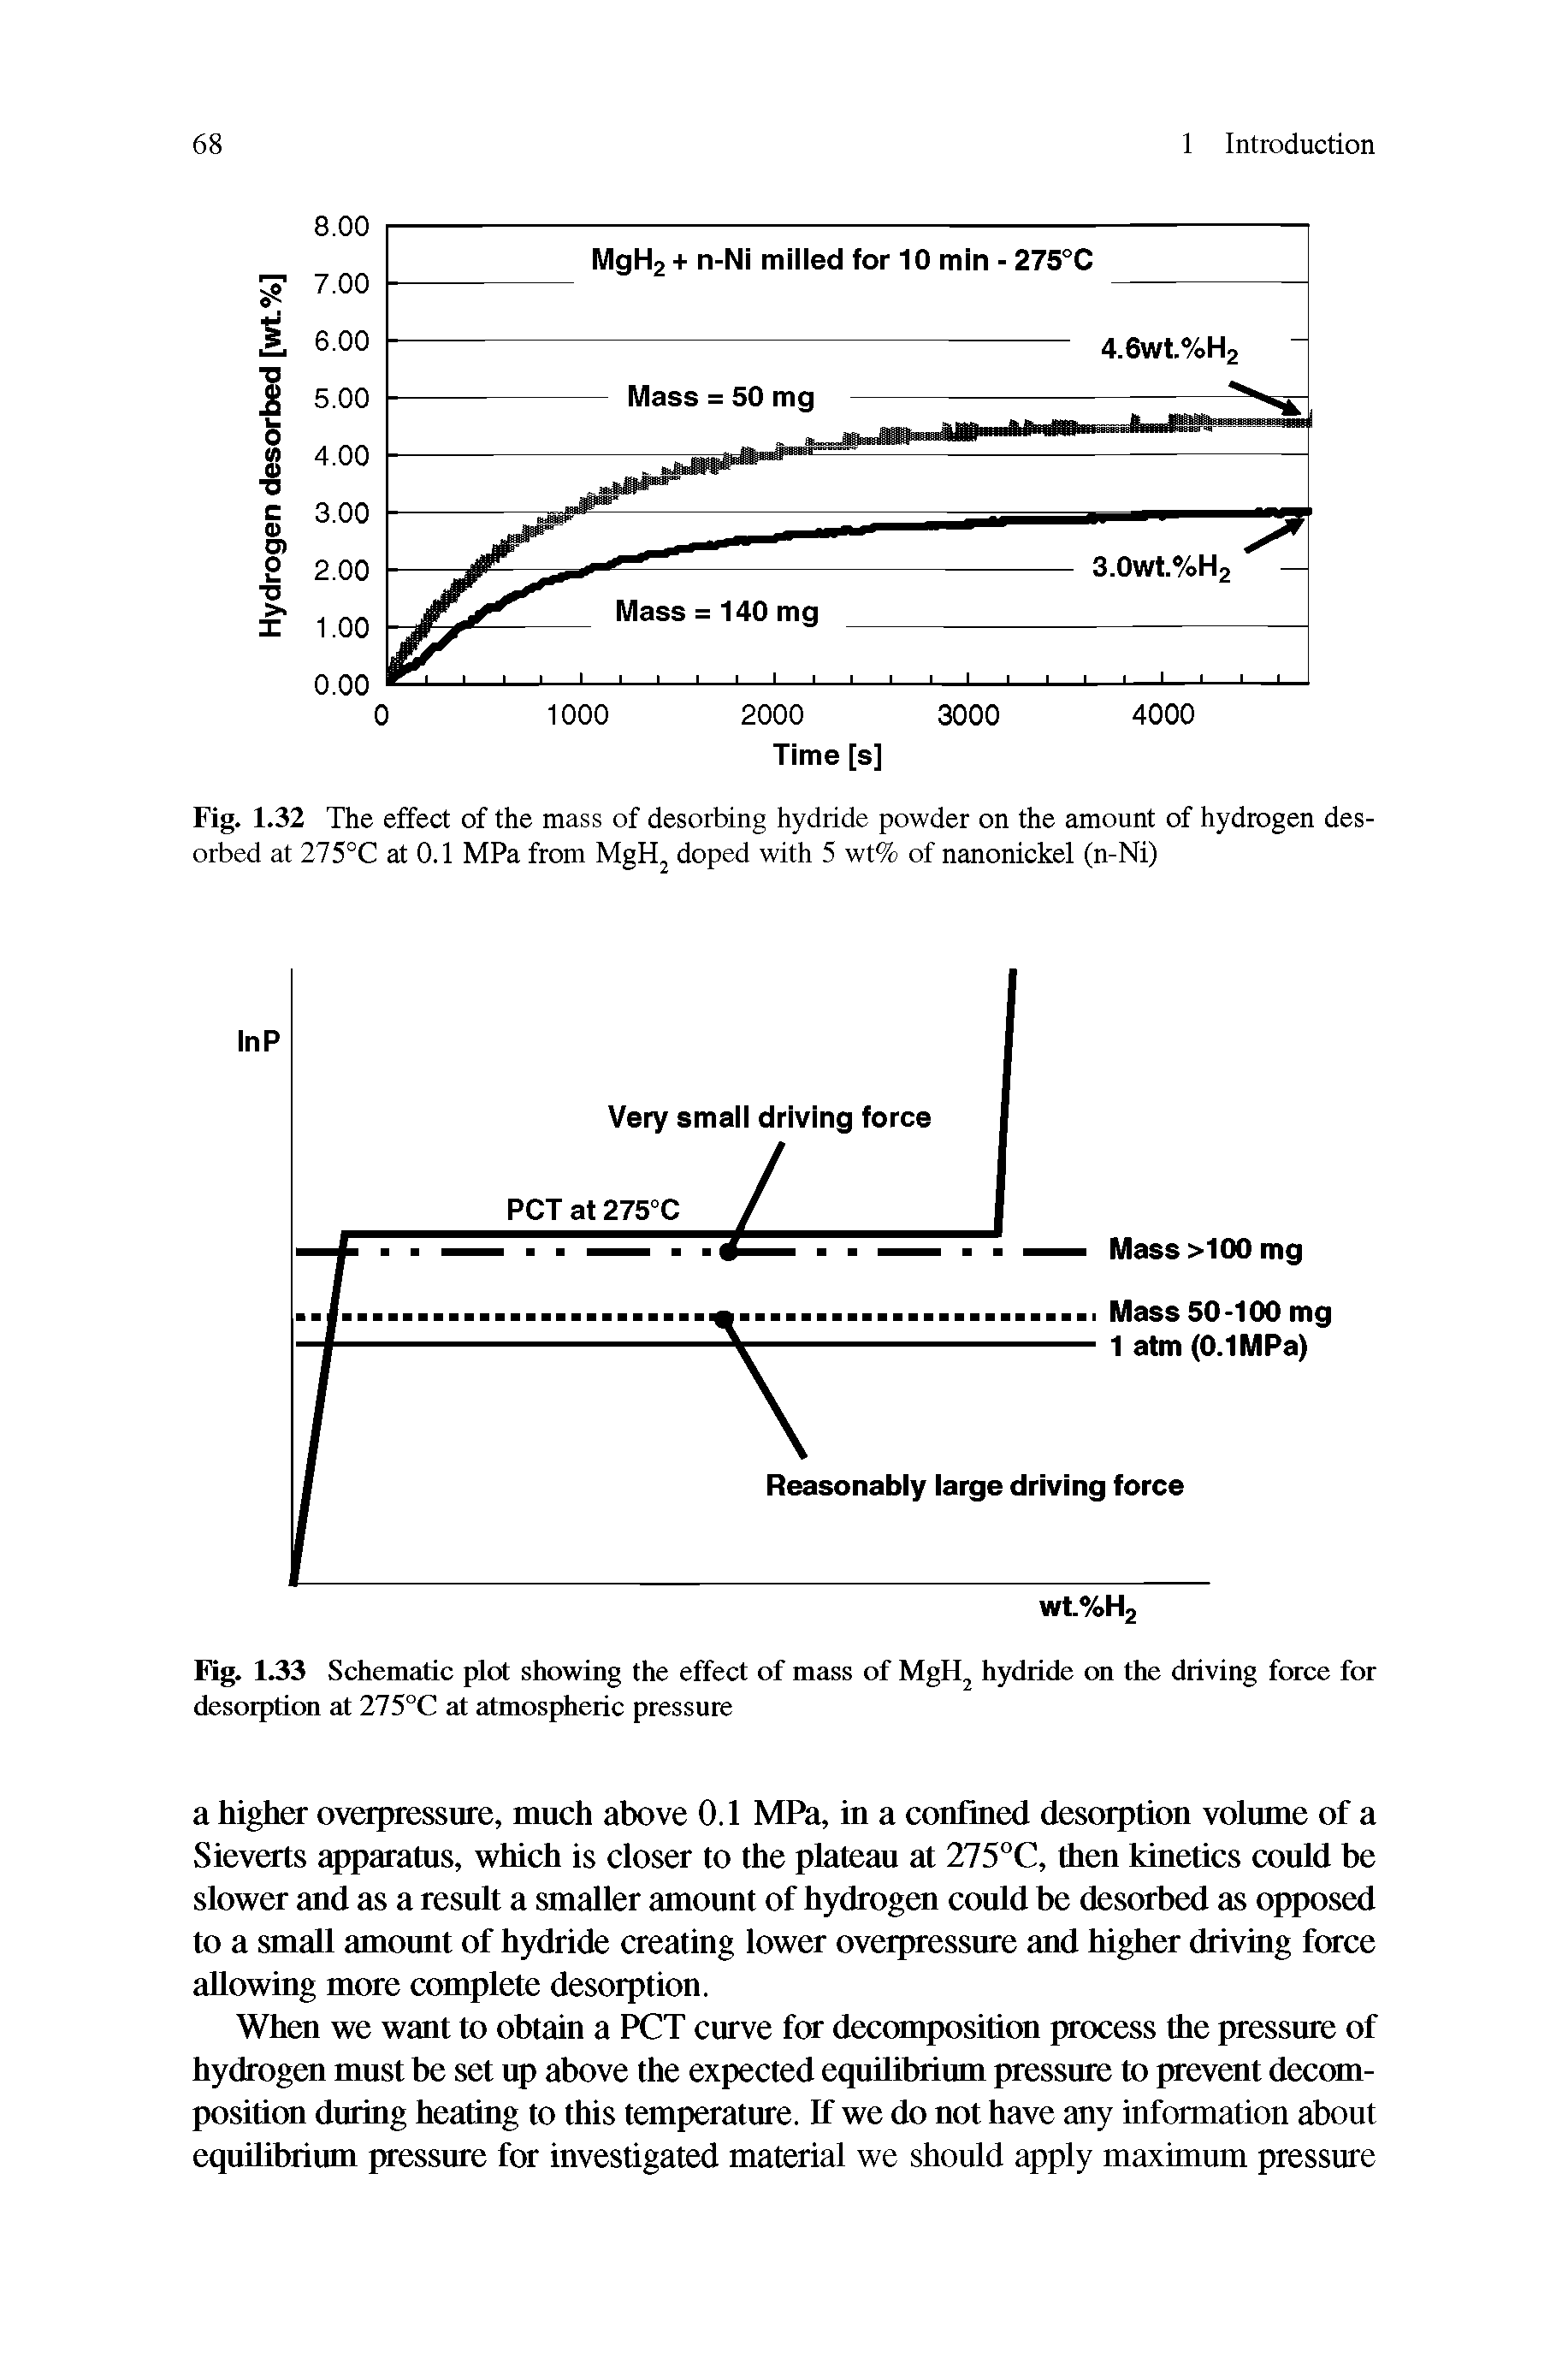 Fig. 1.33 Schematic plot showing the effect of mass of MgH hydride on the driving force for desorption at 275°C at atmospheric pressure...